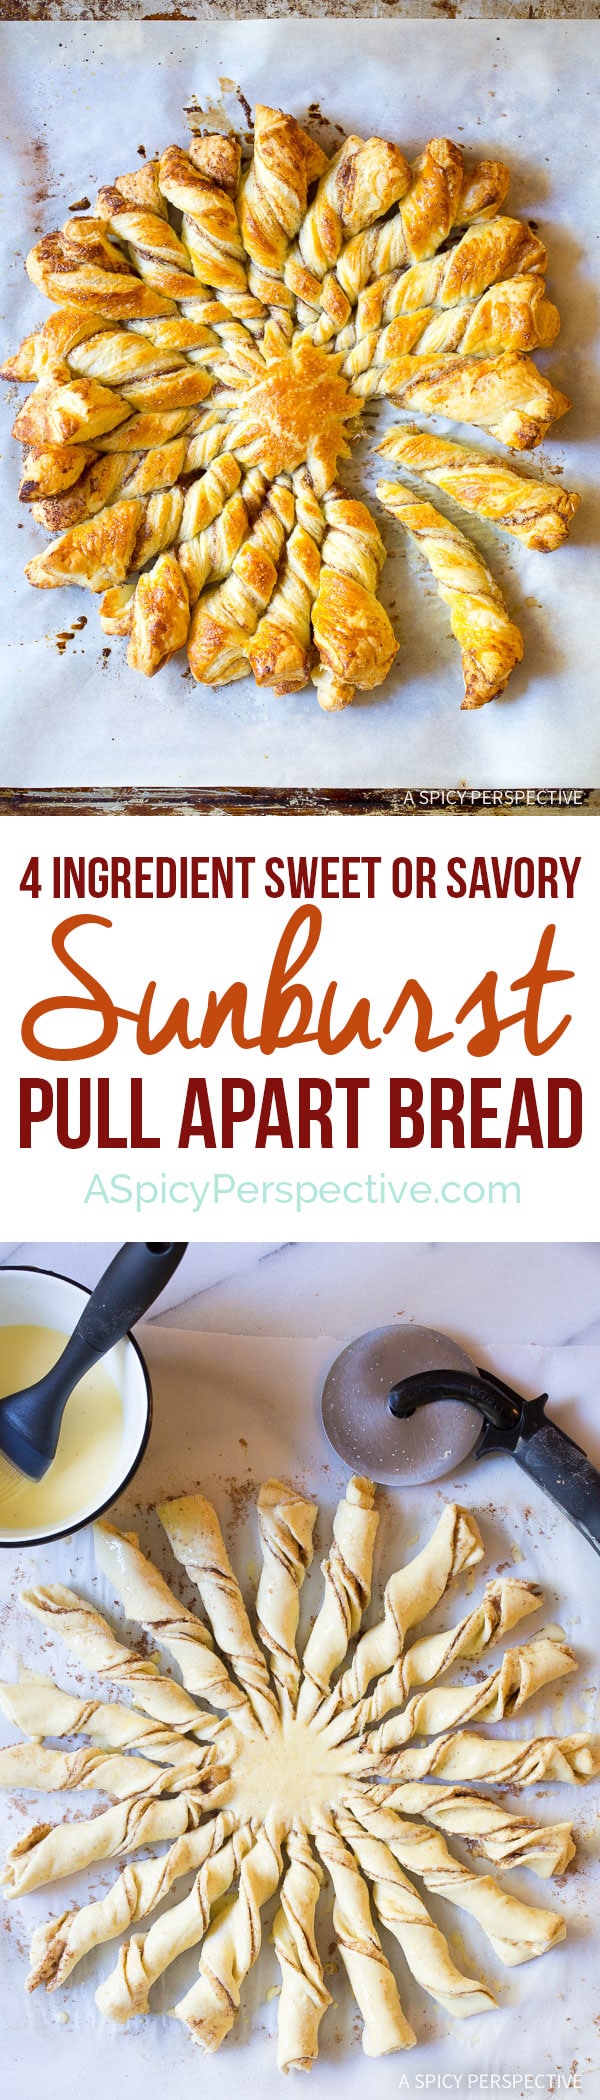 Great for the Holidays! Easy 4-Ingredient Sunburst Pull Apart Bread on ASpicyPerspective.com 